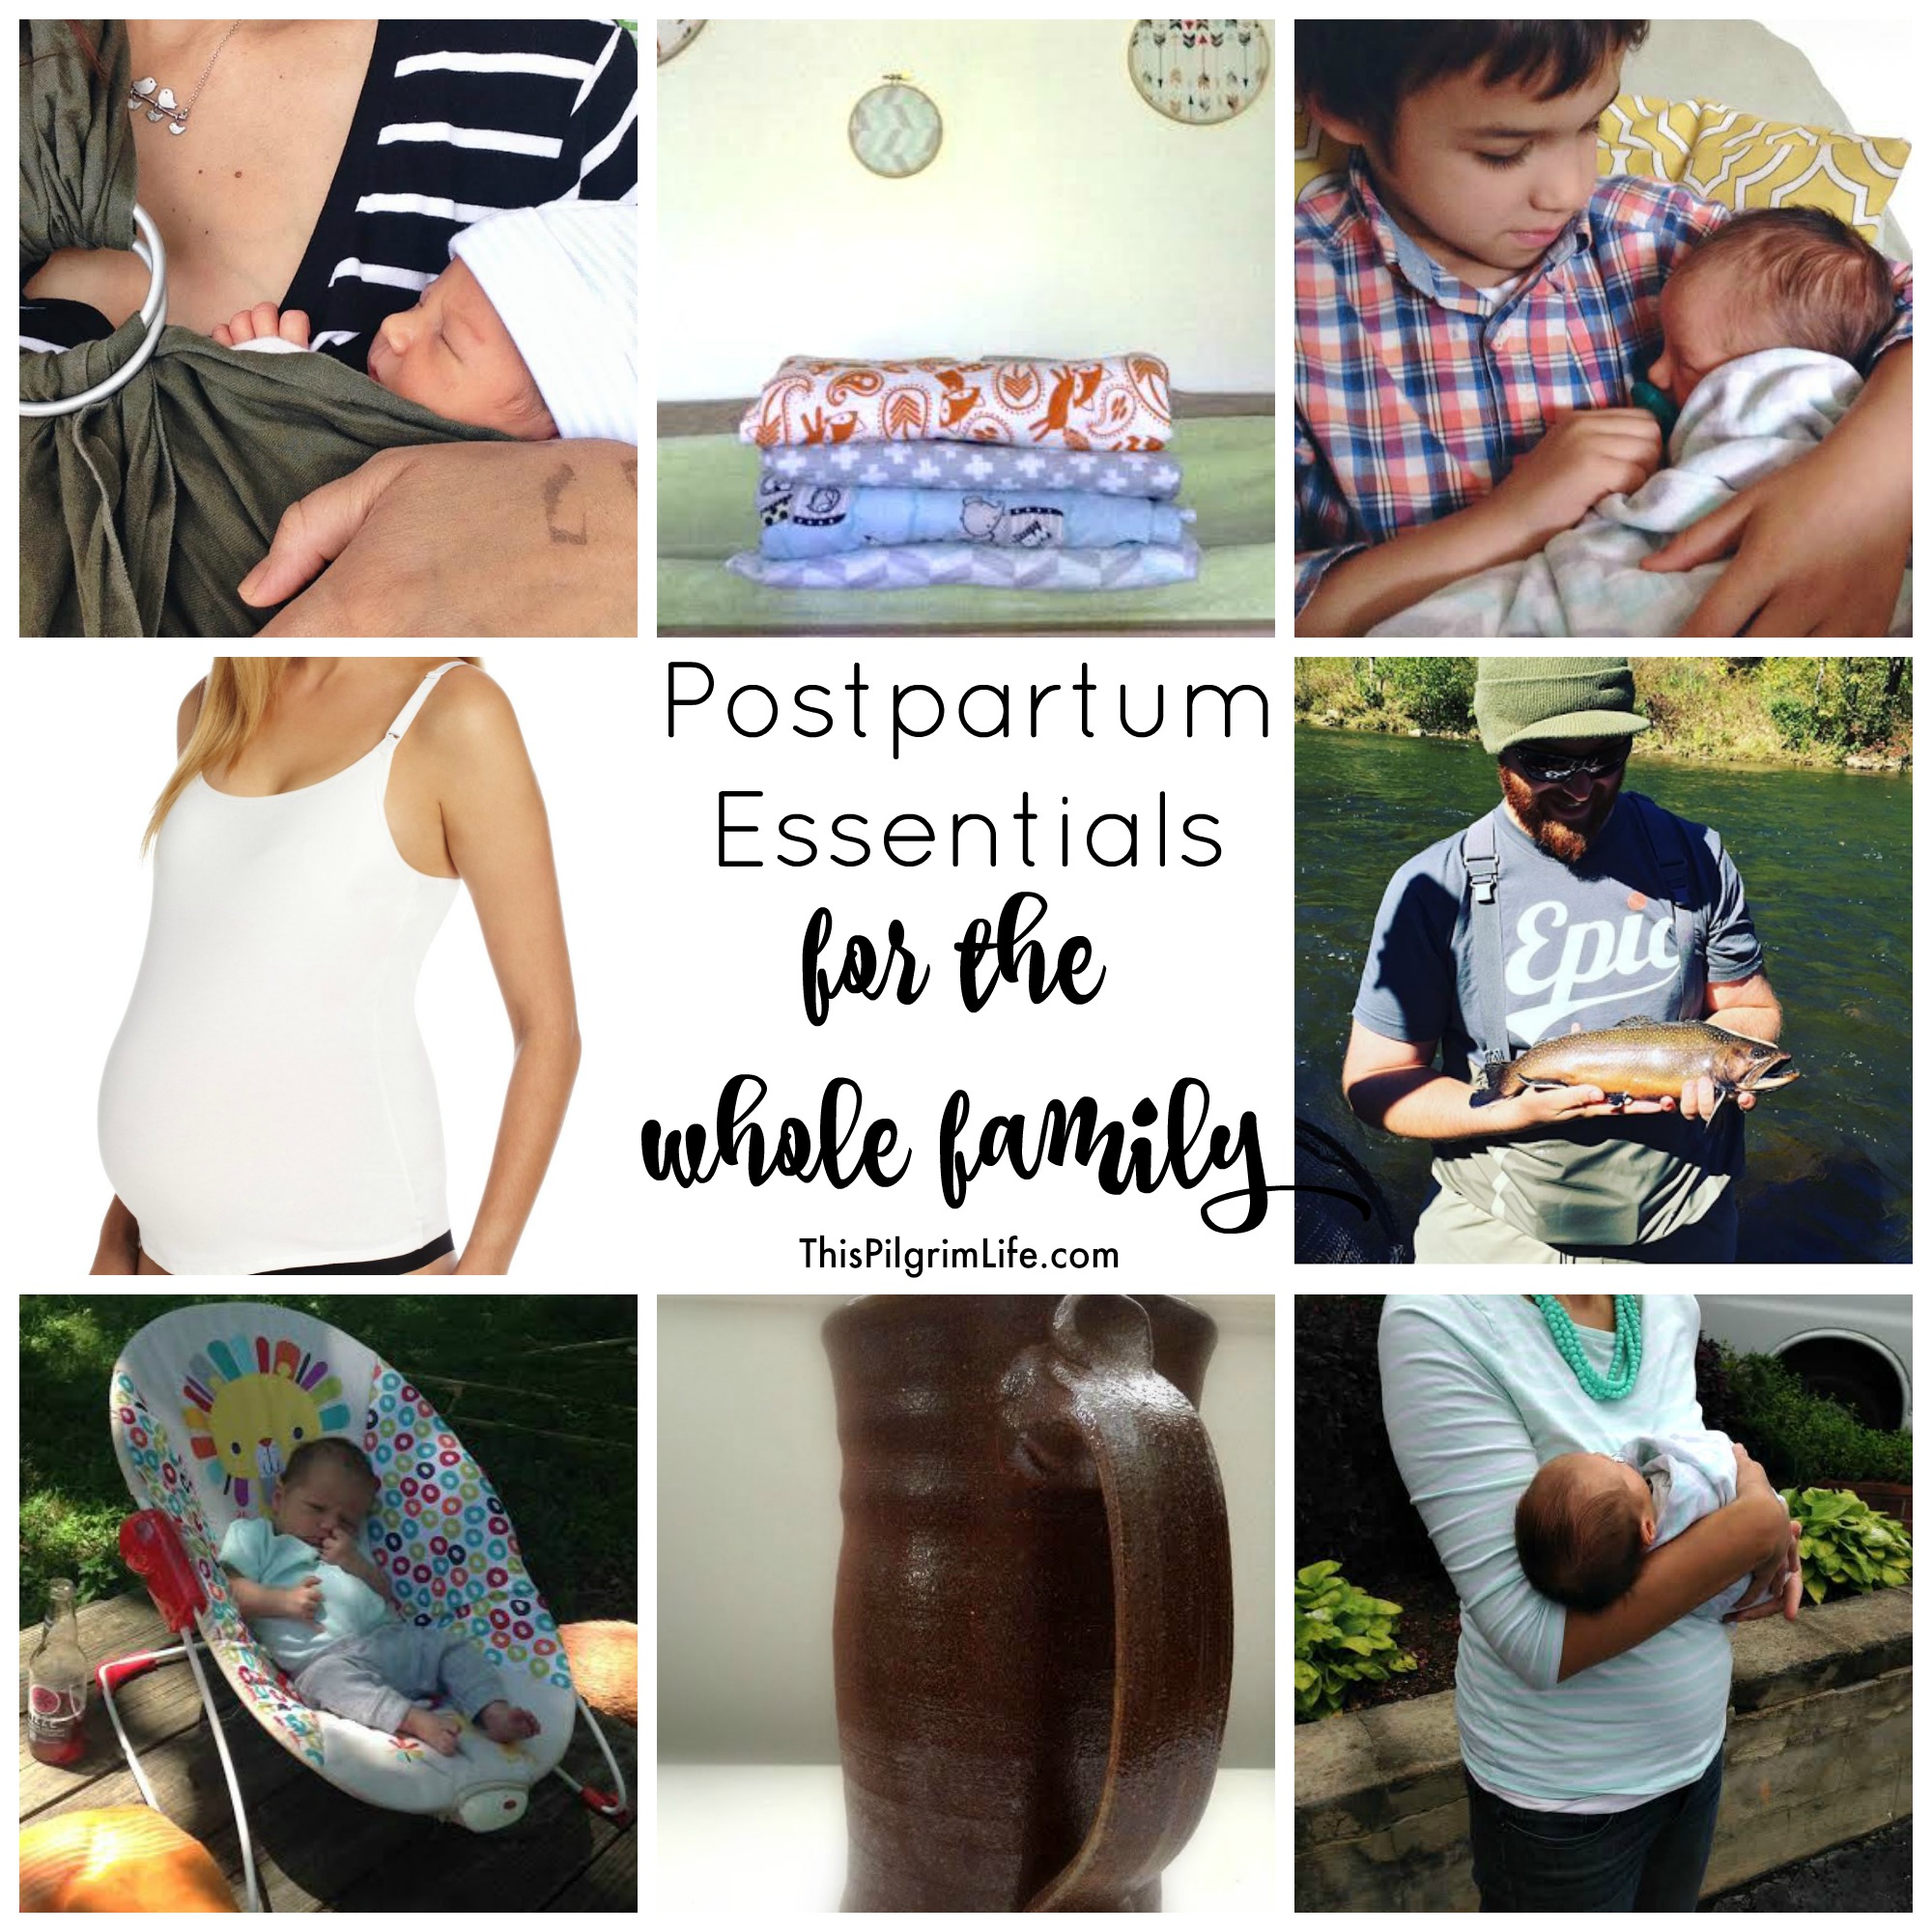 Life with a newborn is a wonderful mix of love and joy, and intensity and fatigue! Let this list of postpartum essentials for the whole family bring more comfort and ease into the newborn season. 